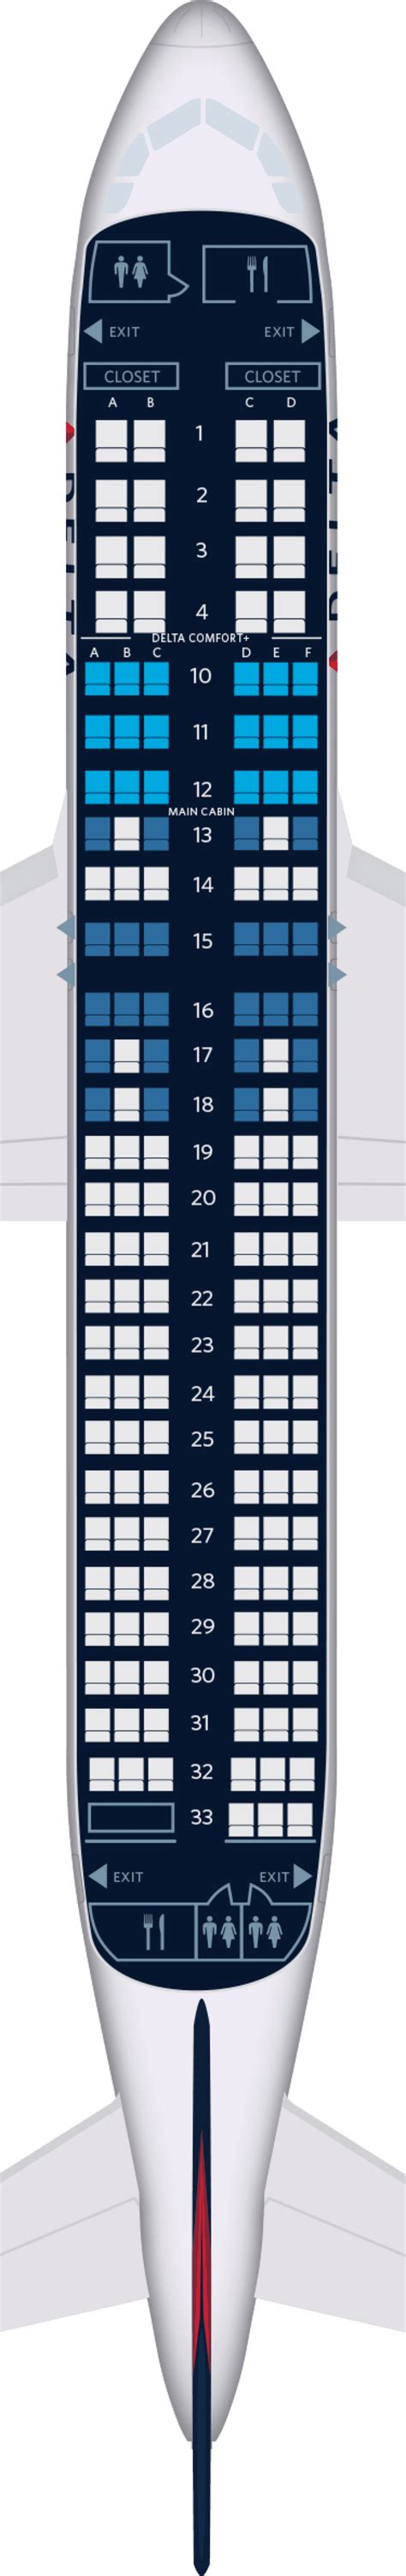 For your next United flight, use this seating chart to get the mo